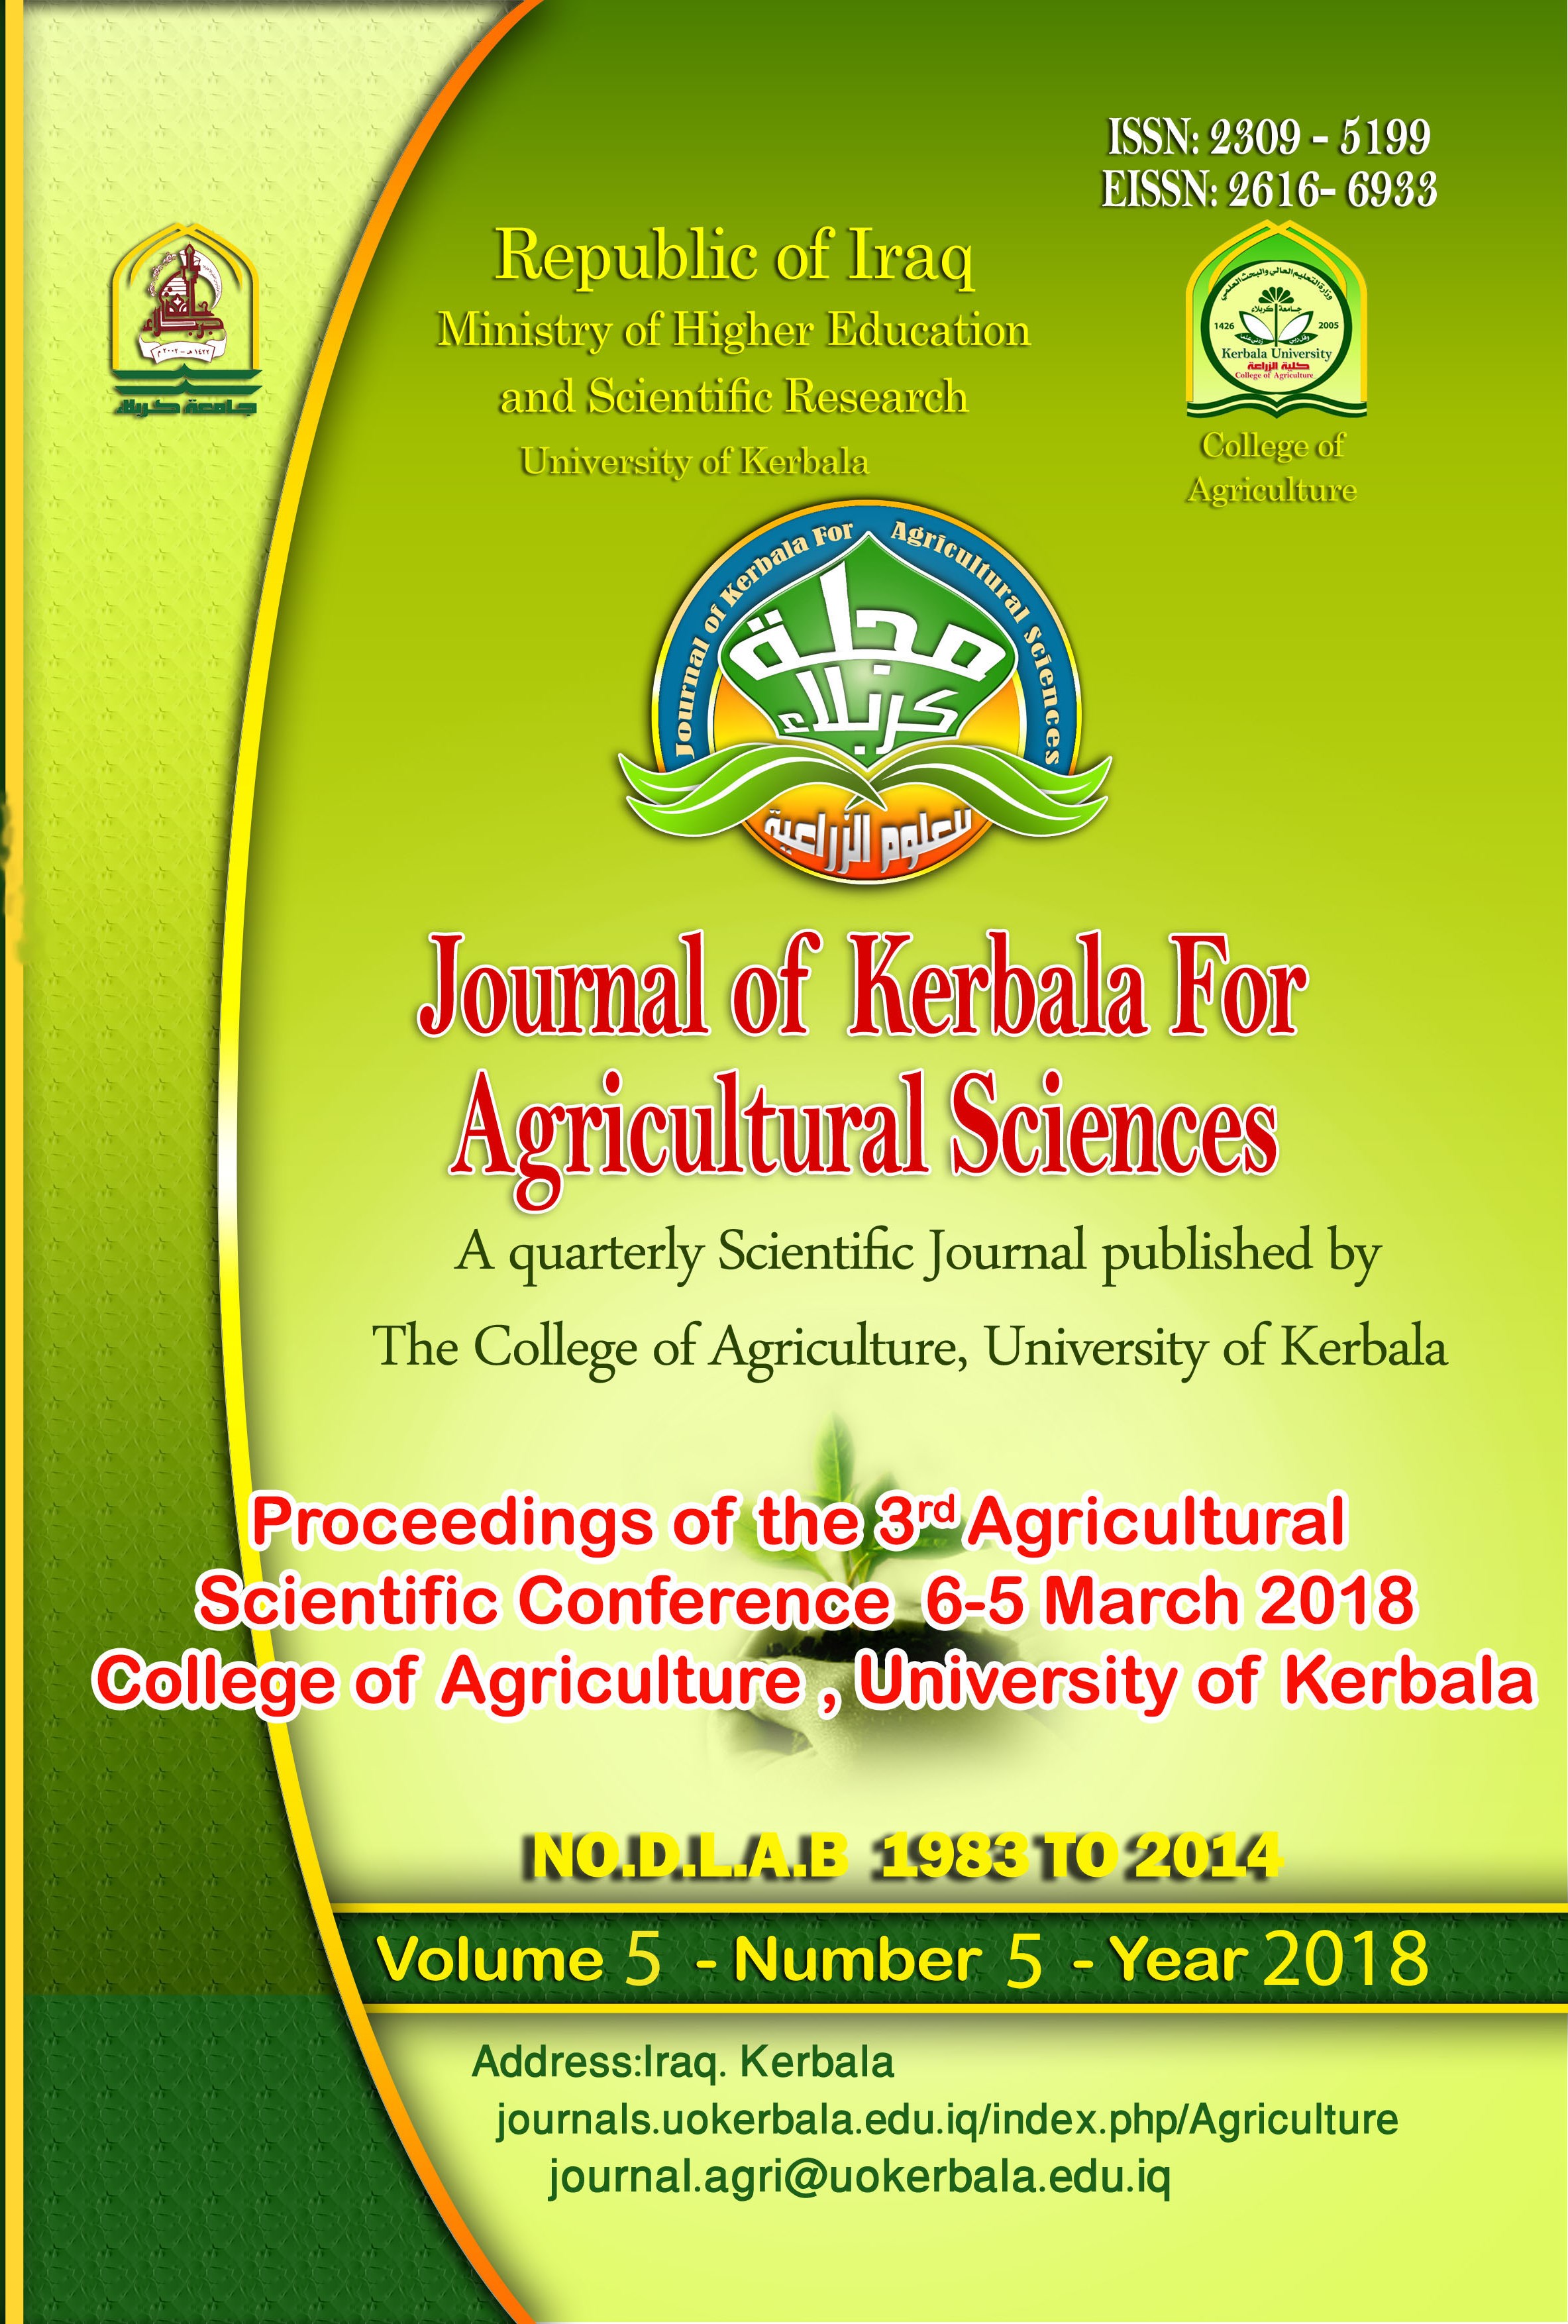 					View Vol. 5 No. 5 (2018): Proceedings of the 3rd Agricultural Scientific Conference 5-6 March 2018/ College of Agriculture / University of Kerbala
				